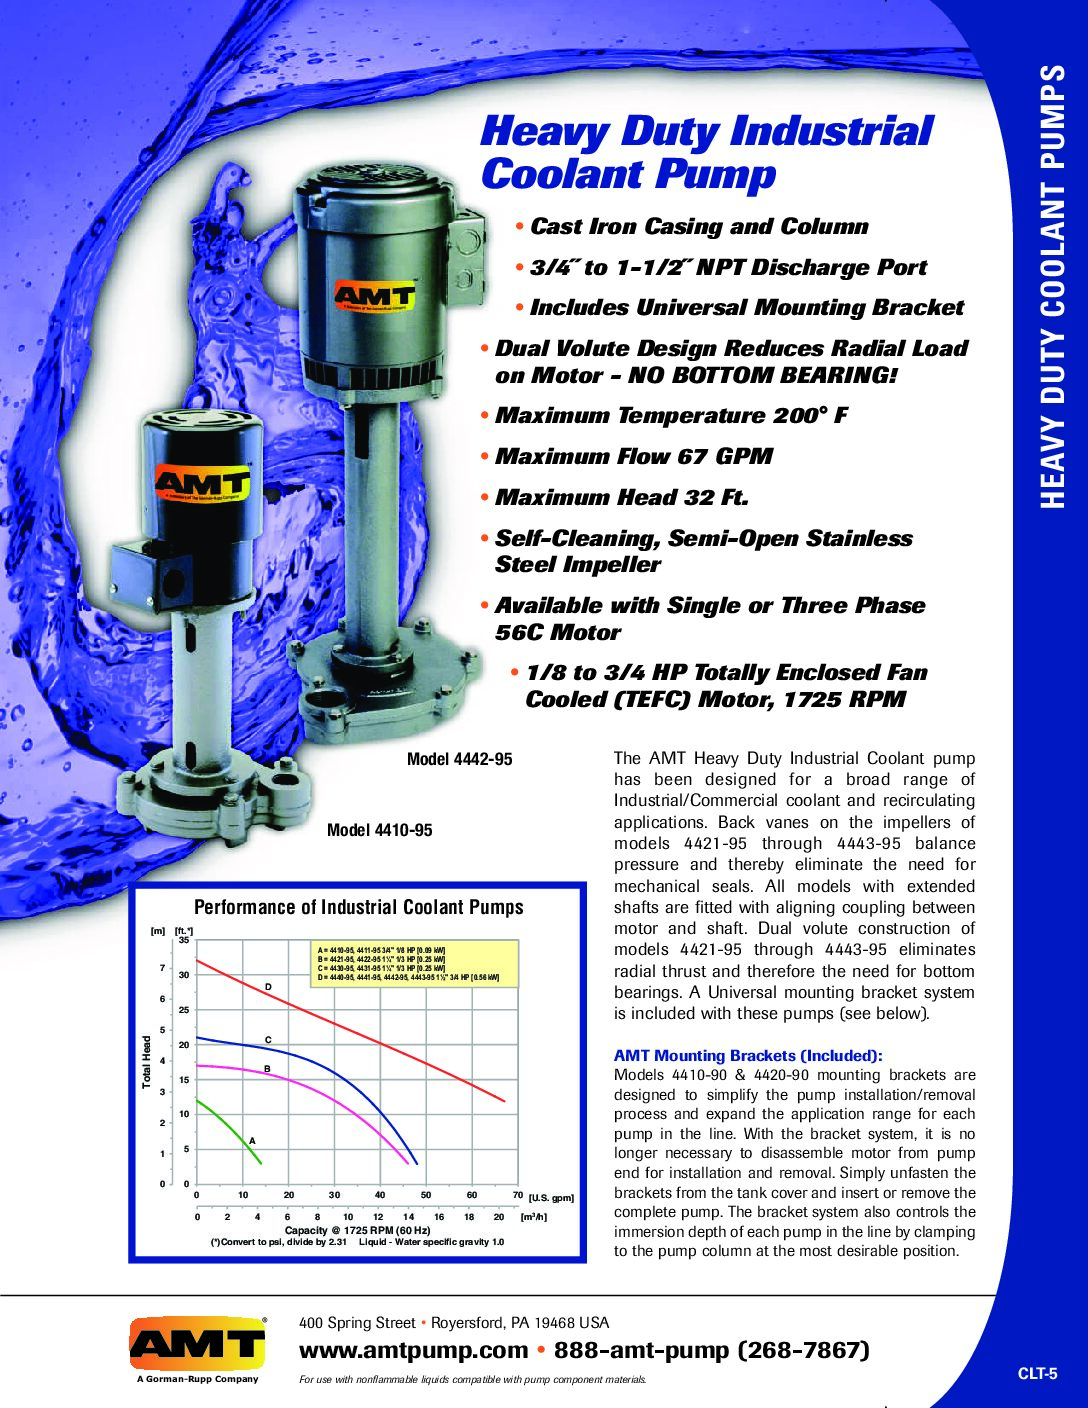 AMT Heavy Duty Industrial Coolant Pumps